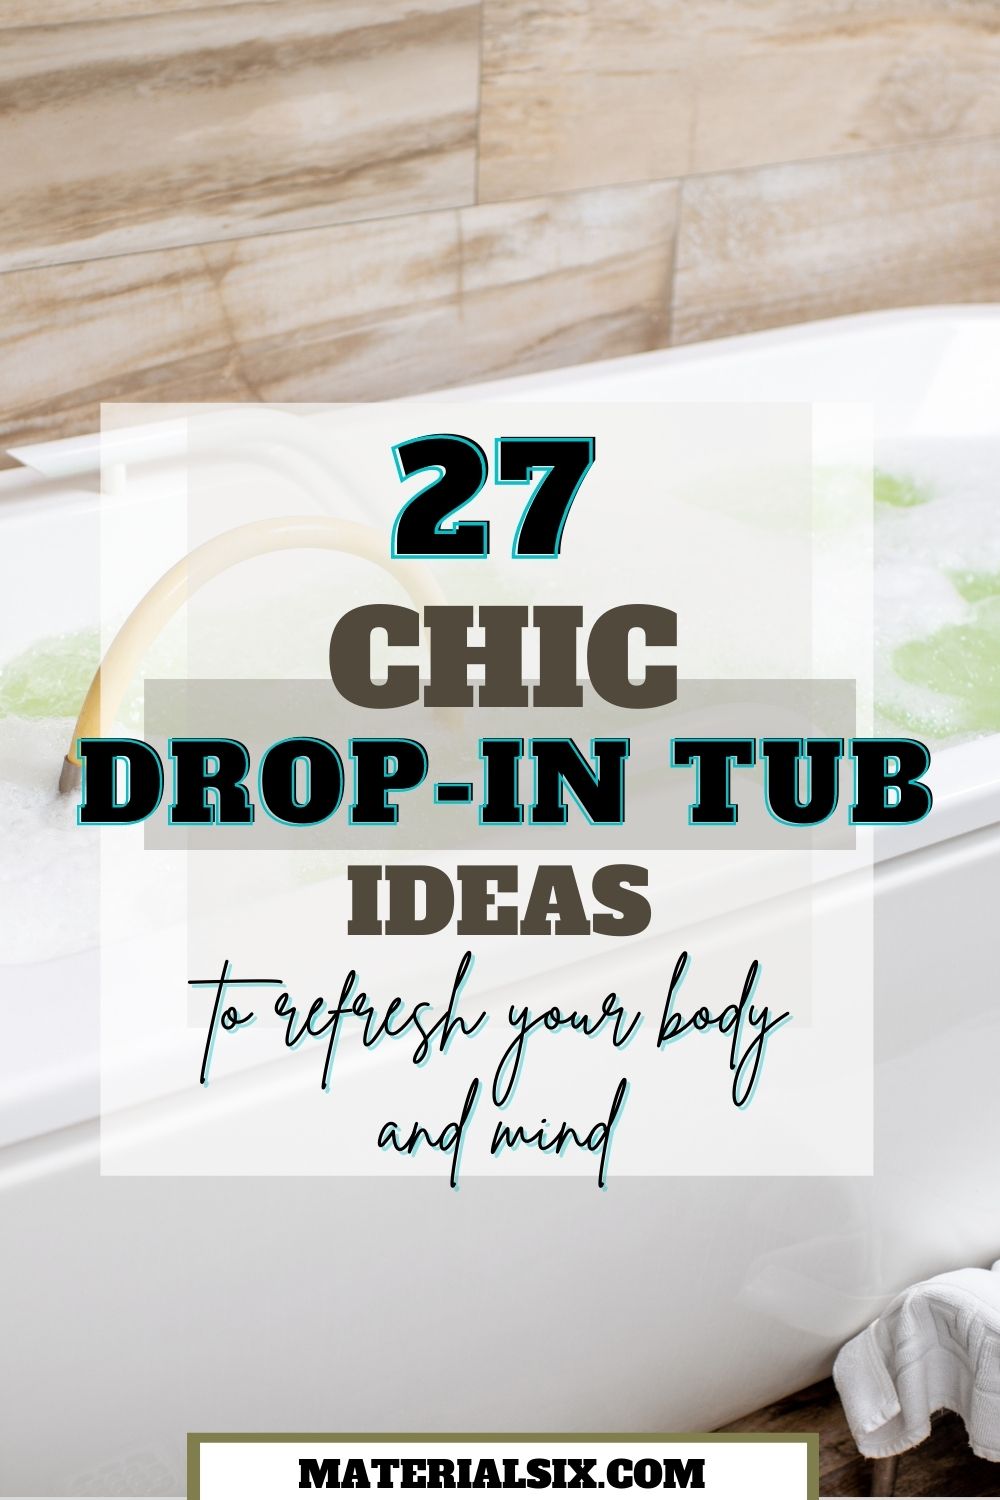 27 Chic Drop-In Tub Ideas to Refresh Your Body and Mind